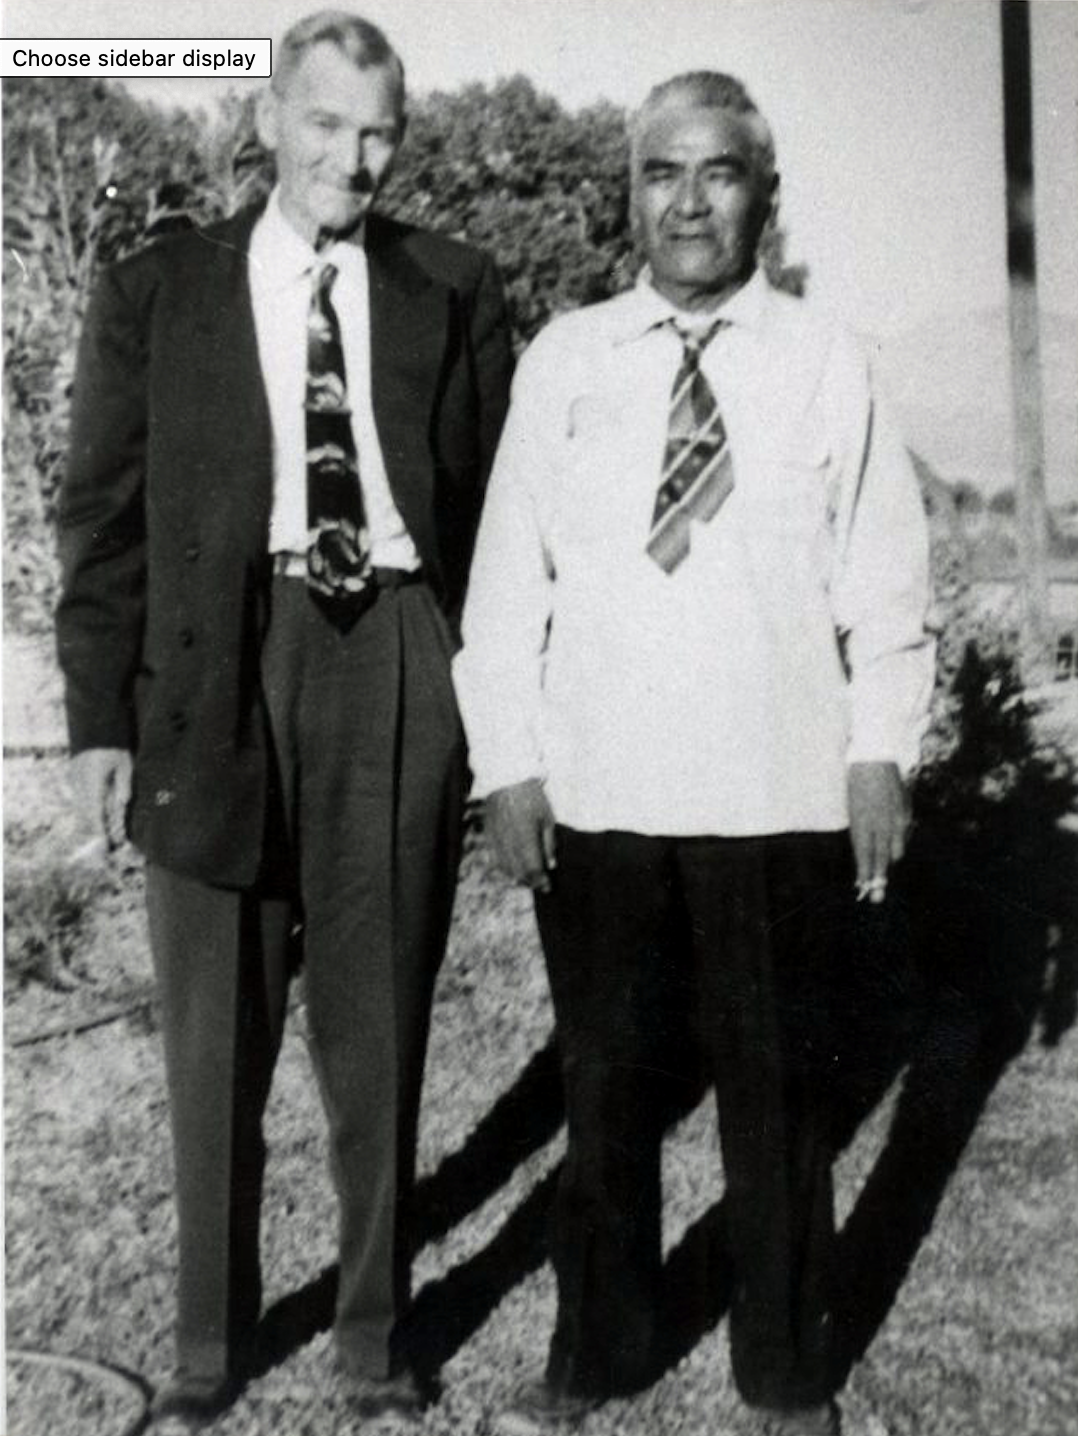 Mr. Fay Perkins (left) and Mr. Willis Evans